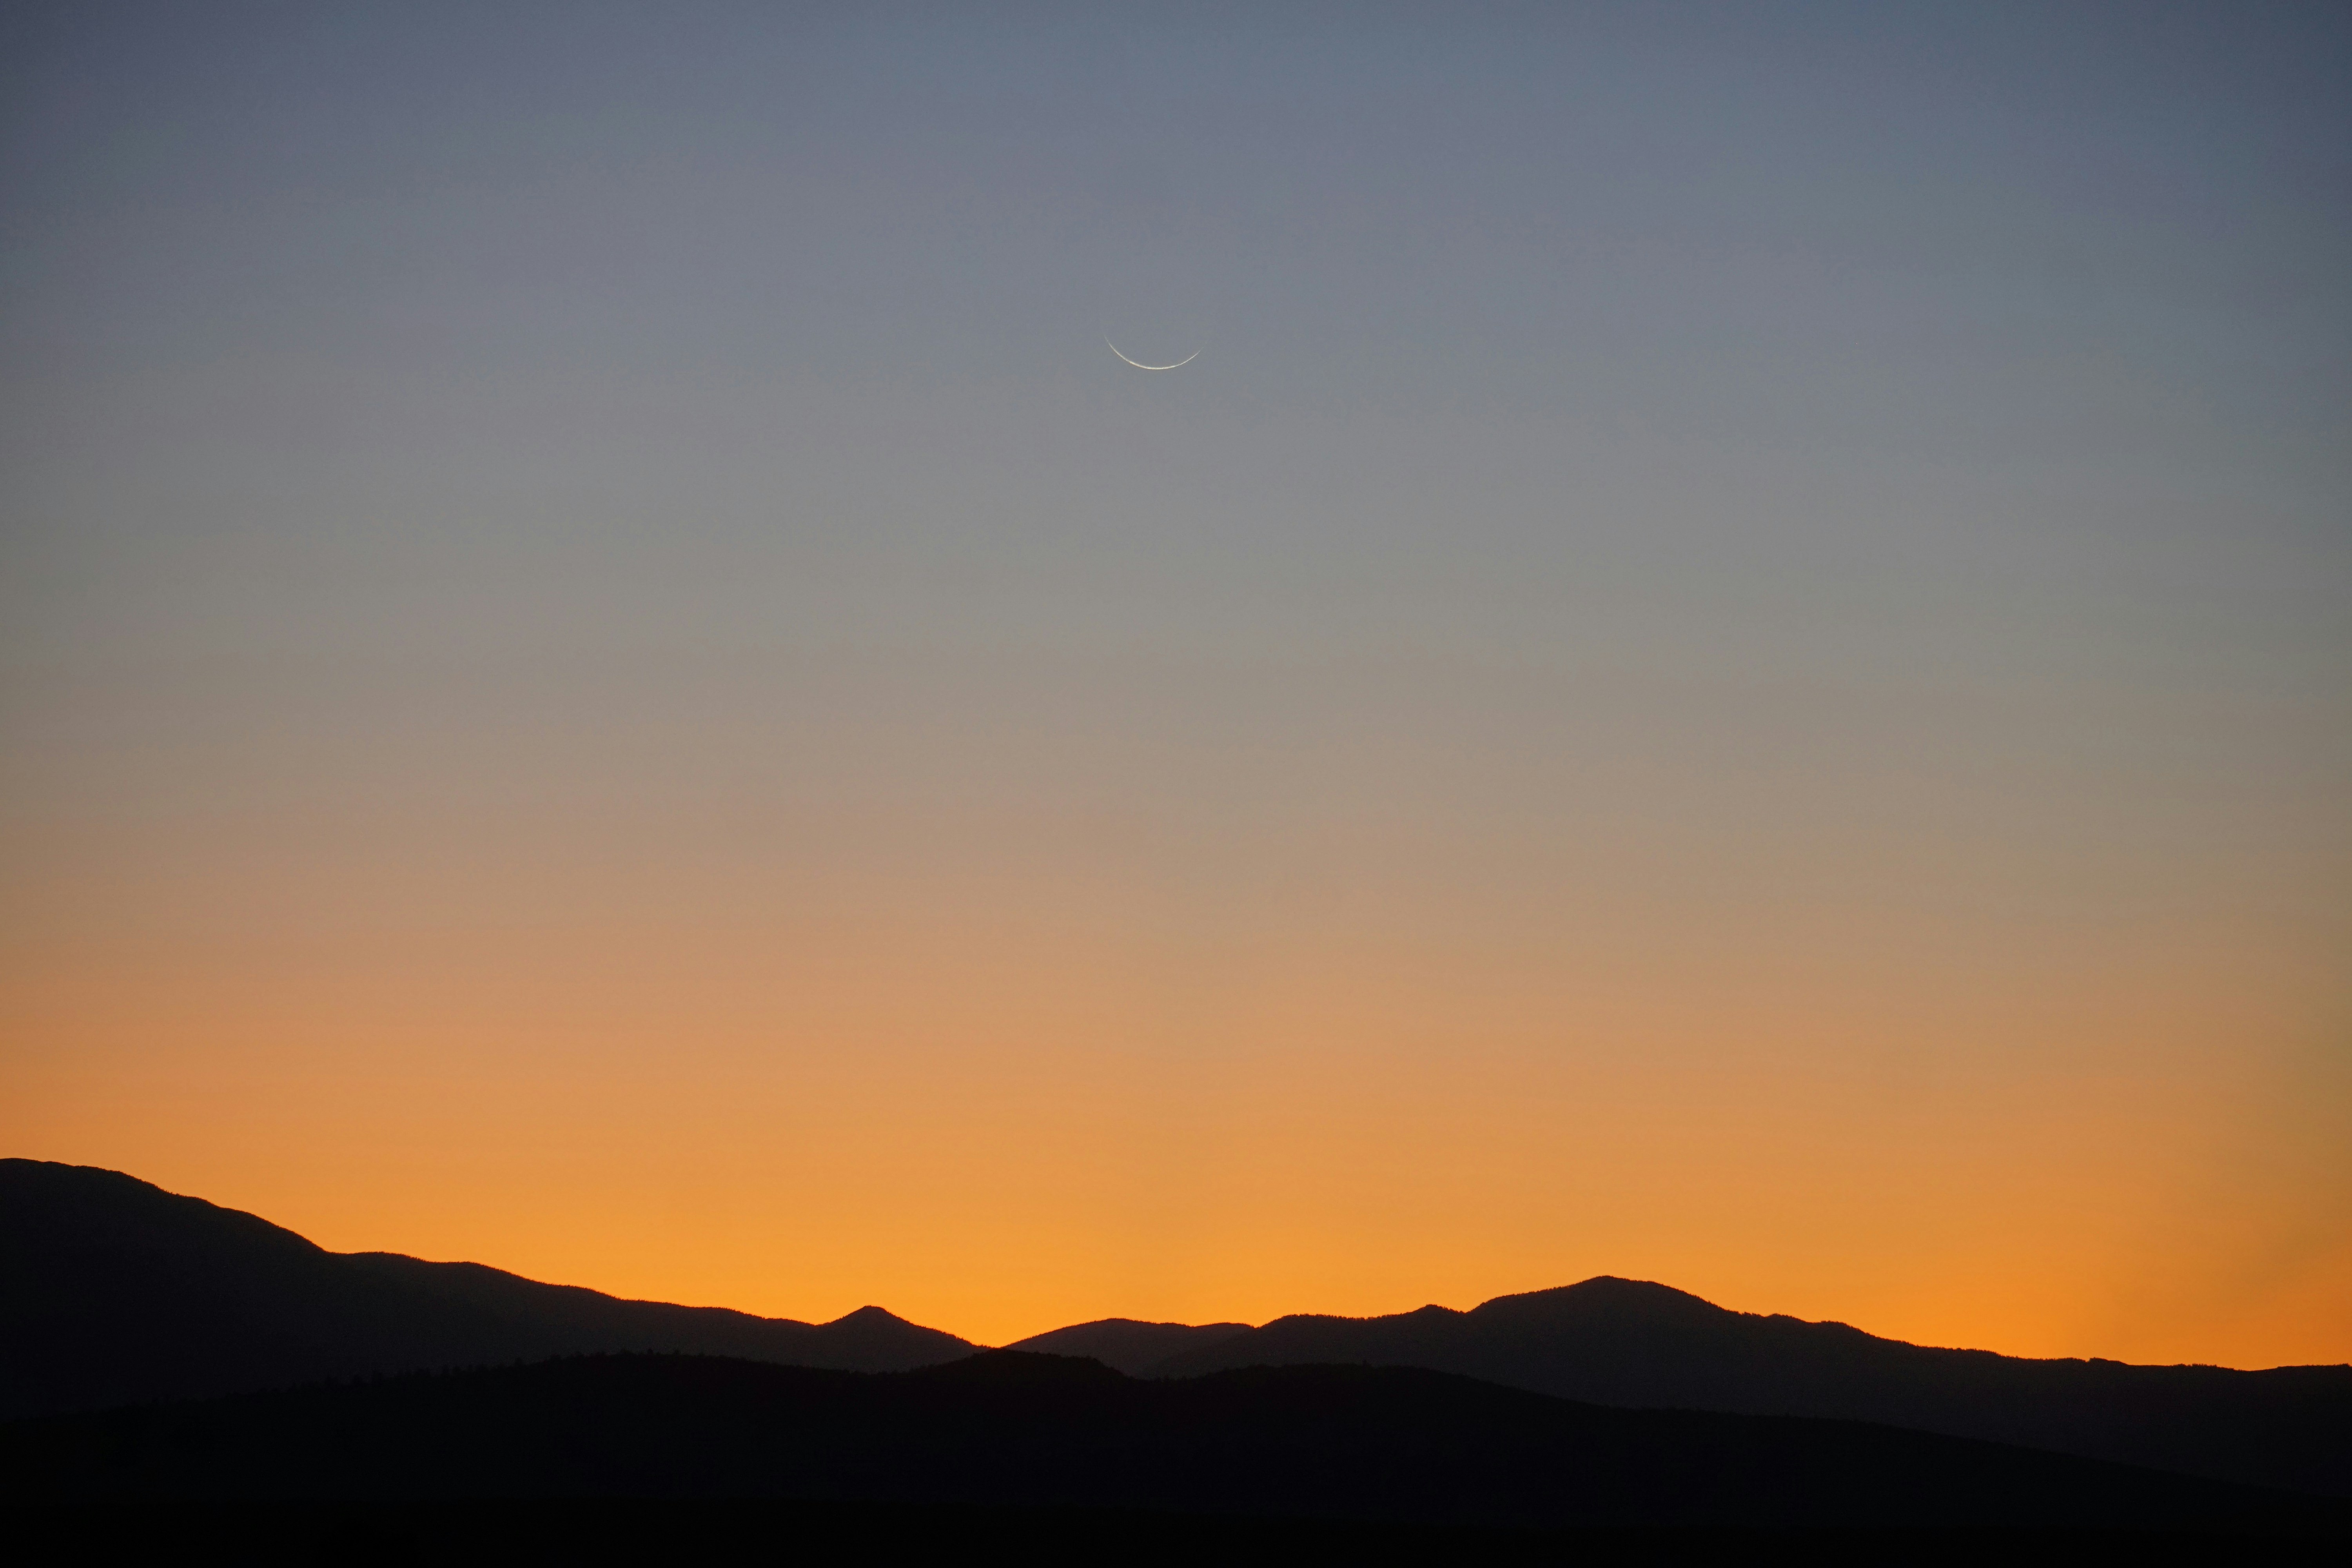 New Day, Old Moon

The waning crescent moon rises for the last time of the cycle on Aug 29, 2019. It disappeared into the daylight soon after.